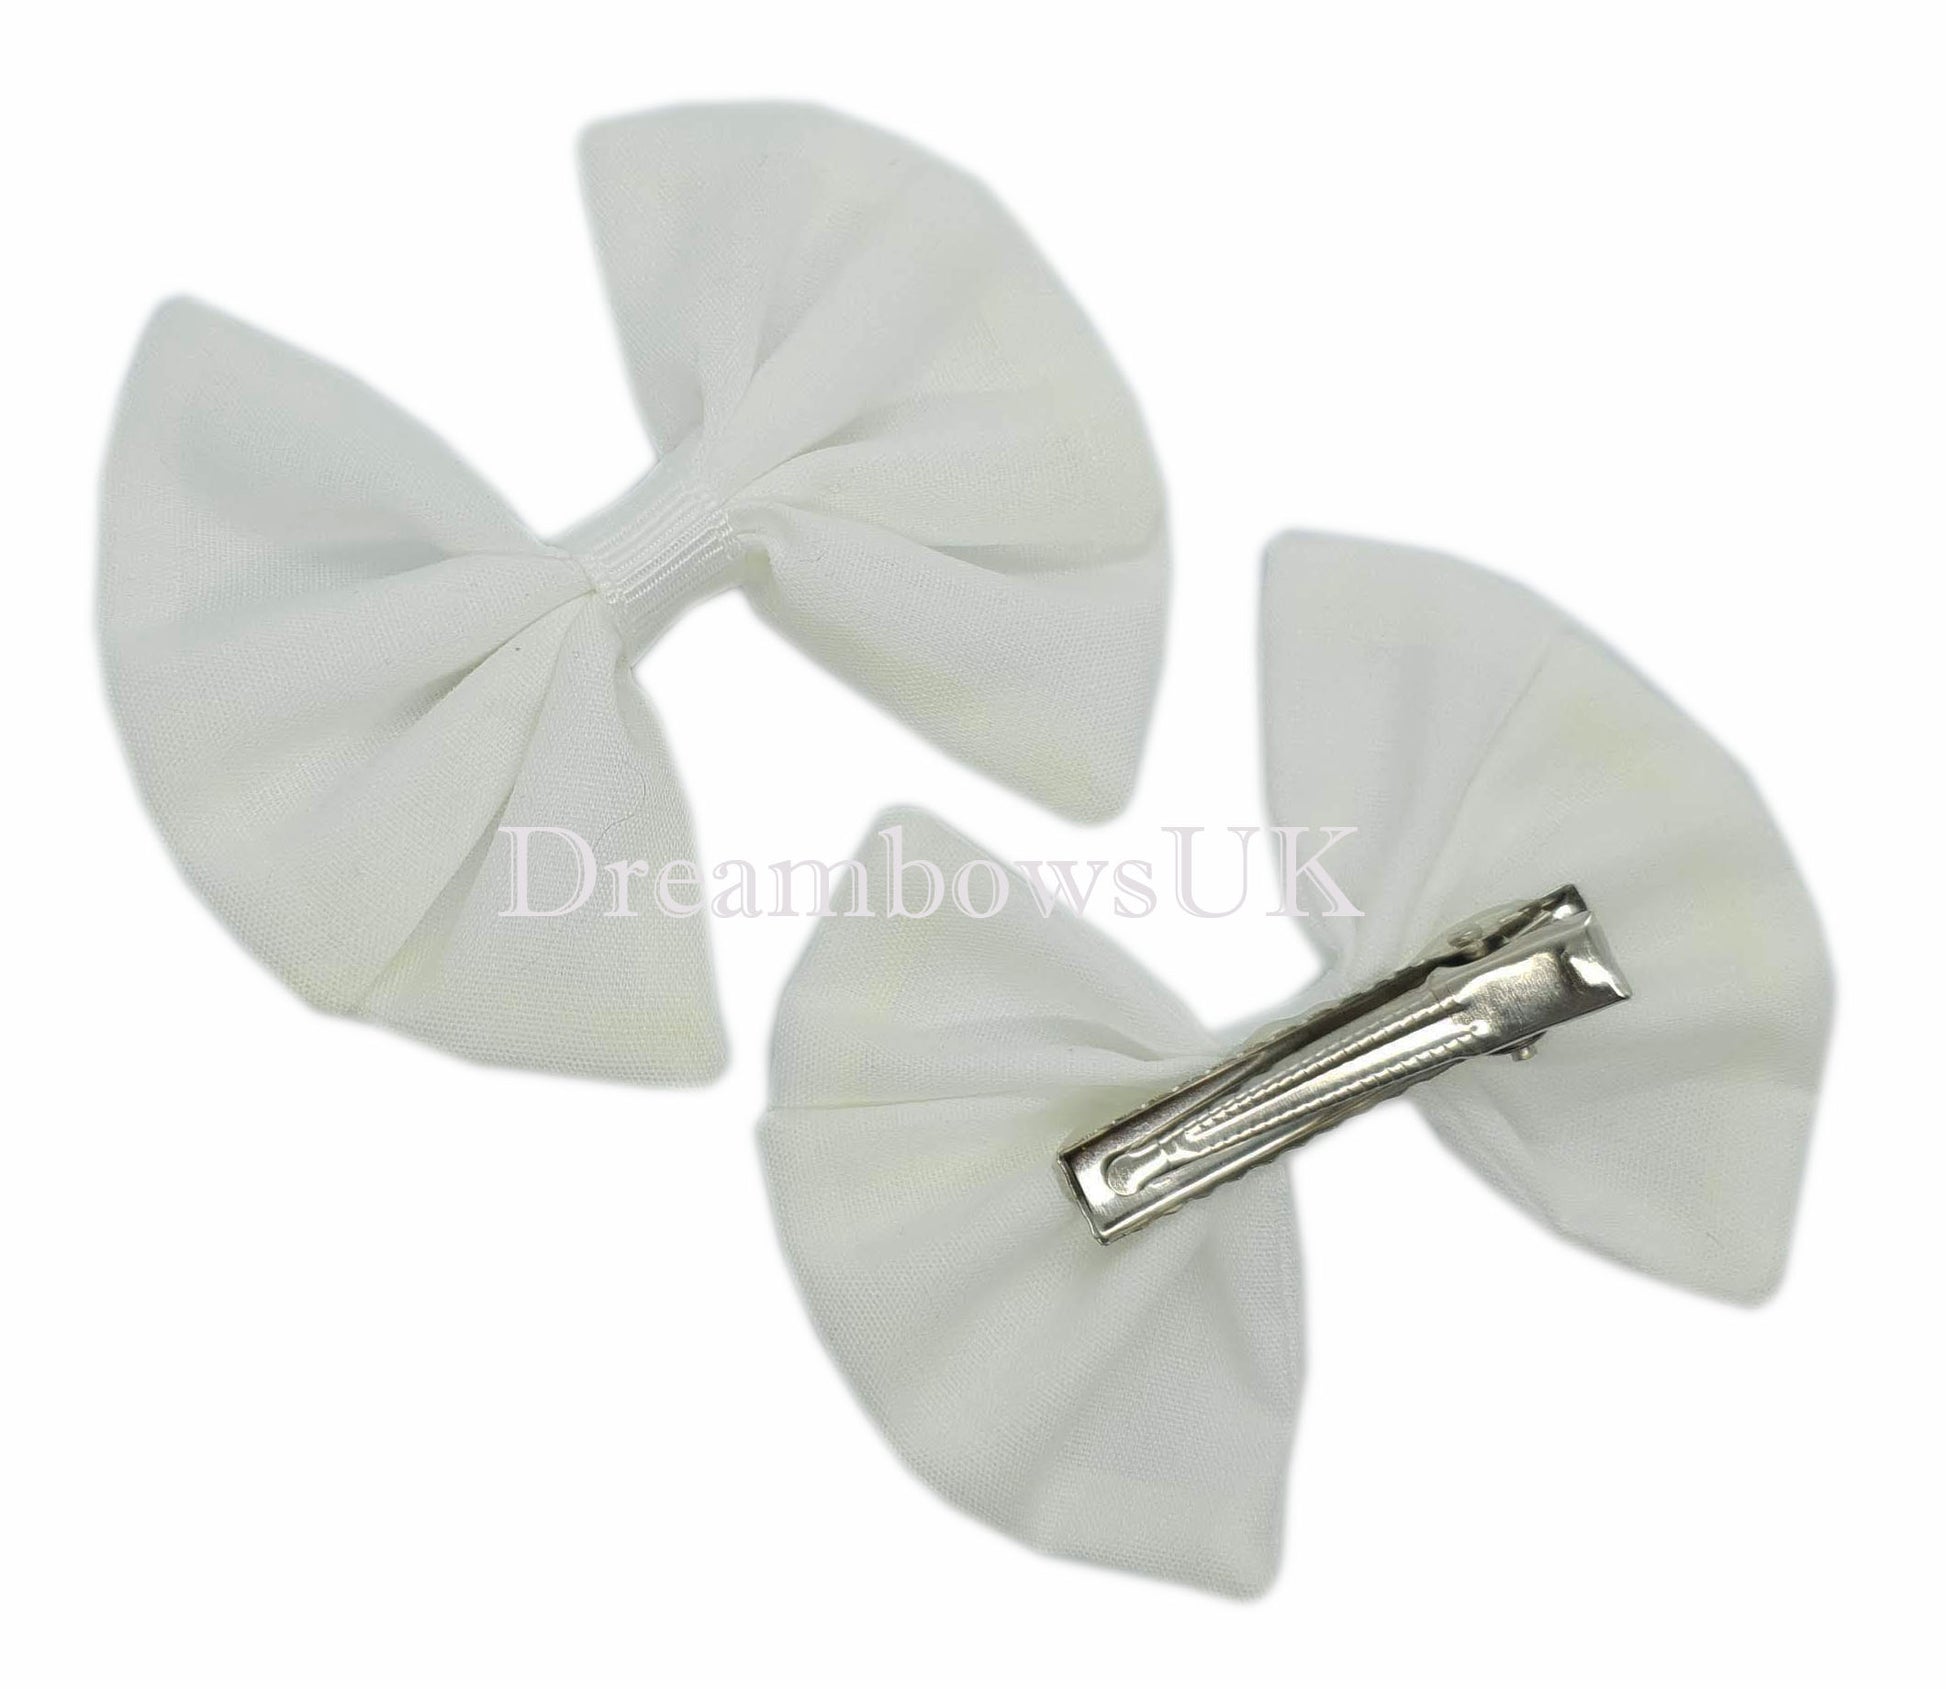 White fabric hair bows on alligator clips